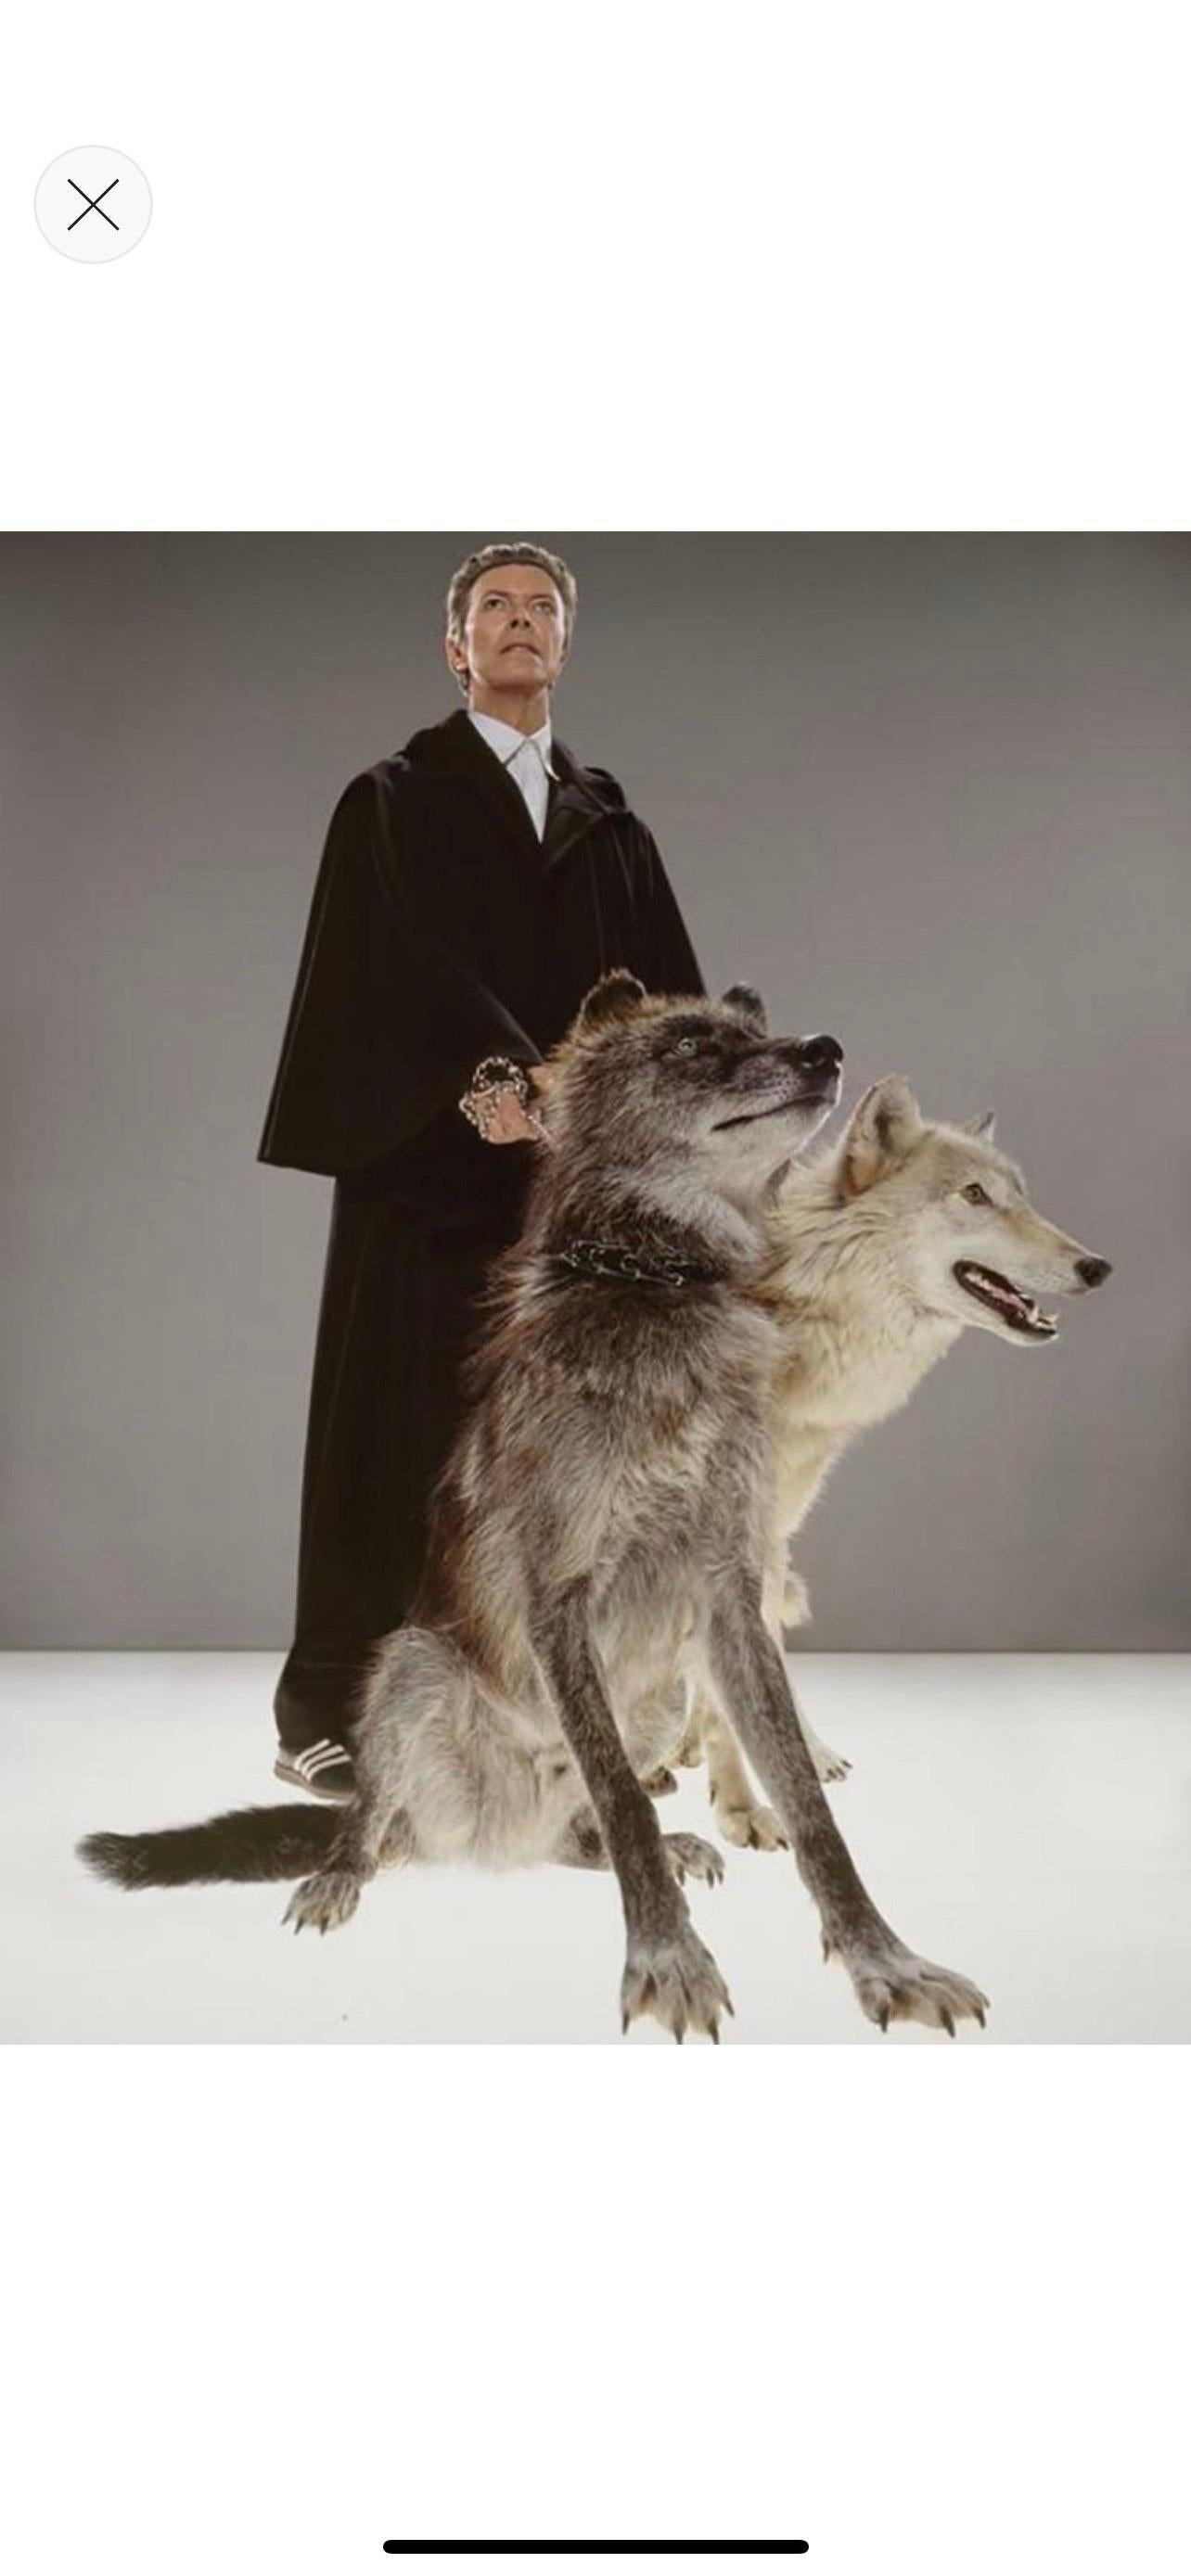 The Pack

Photo by Markus Klinko 

Limited Estate Edition

David Bowie with a pair of wolves

C Print
Produced from the original transparency
Certificate of authenticity supplied 
Paper size 20×24 inches/ 51 x 61 cm
Printed 2020

Edition sizes are